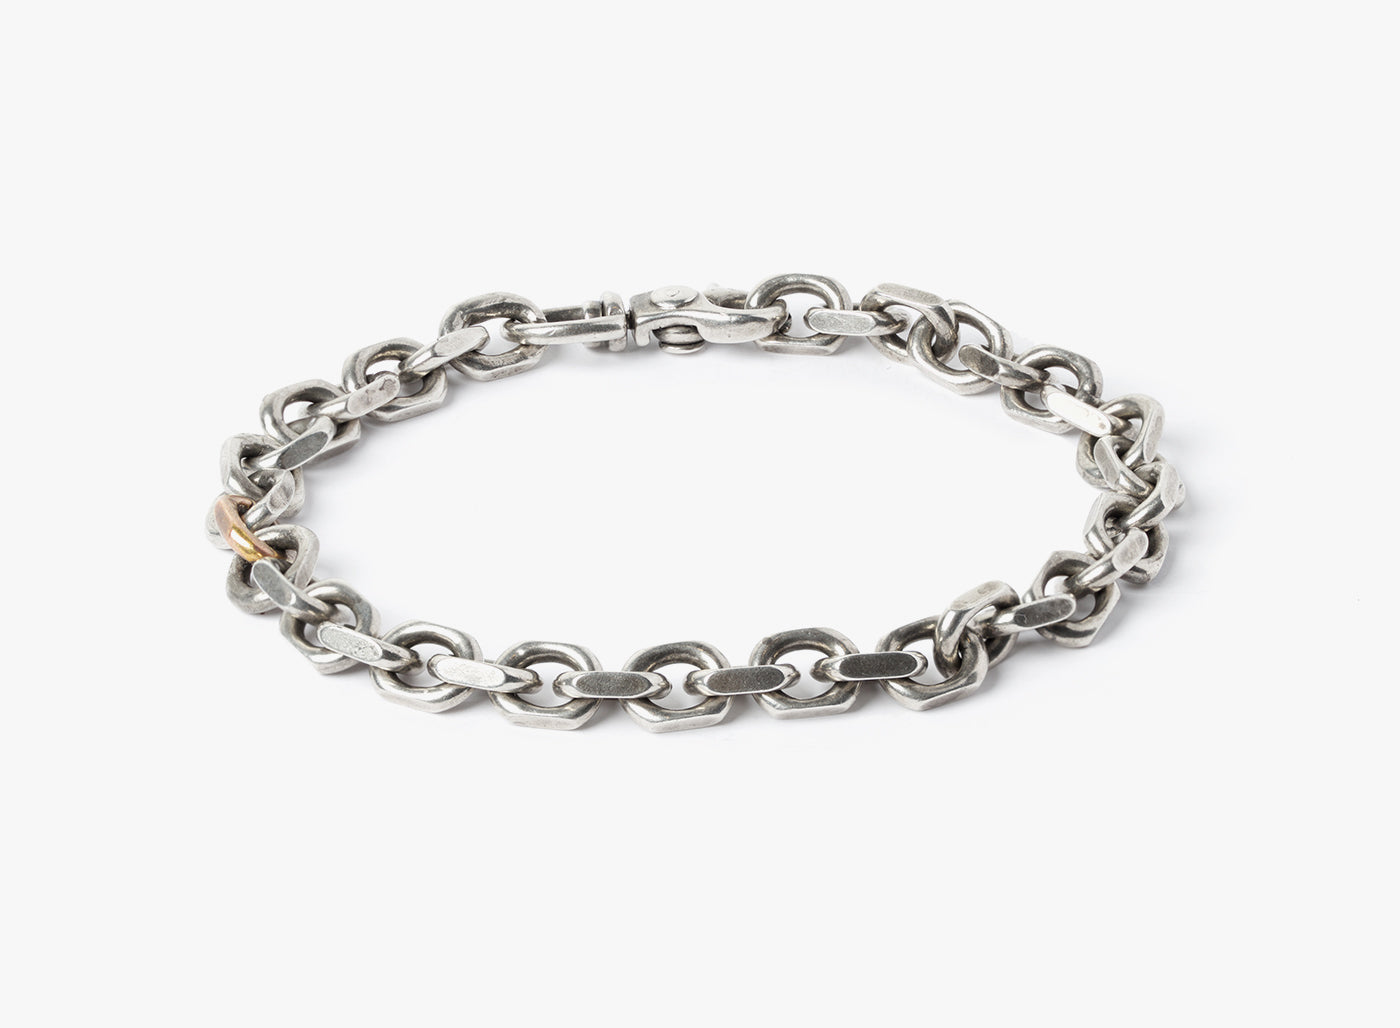 MIXED METAL BRACELET 035: this adjustable sterling cable chain is offset by a single 18k rose gold link